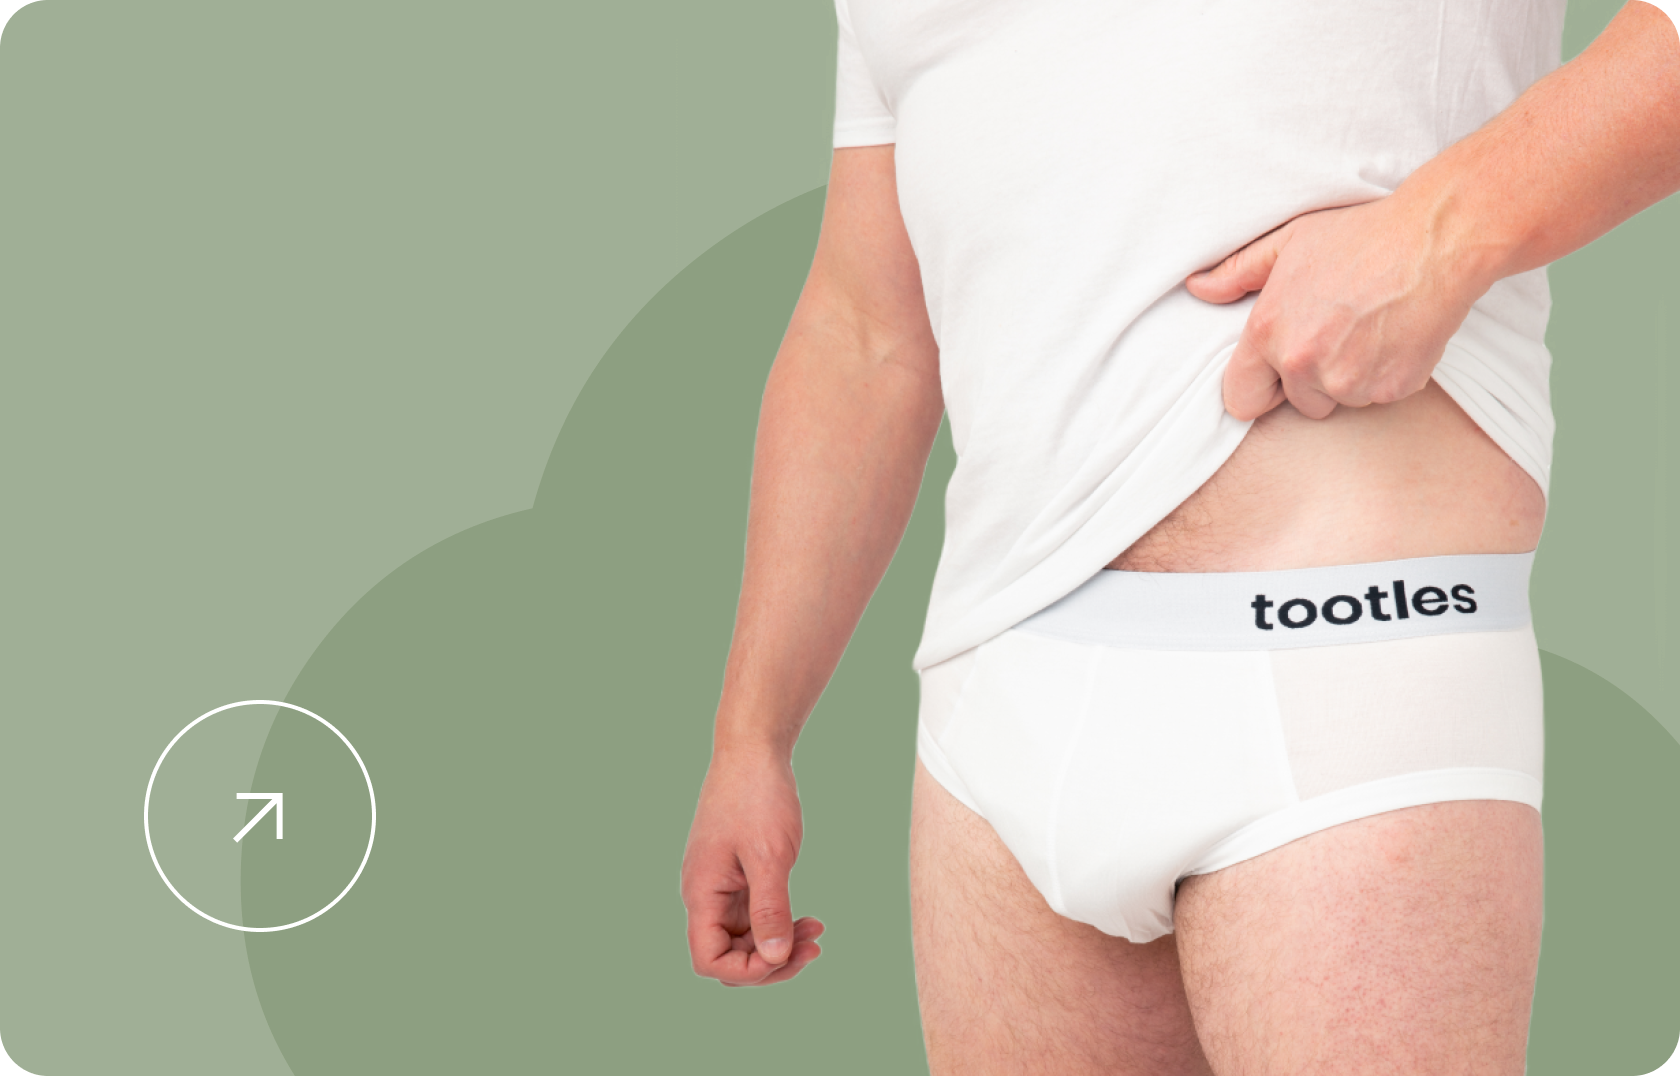 Shreddies is underwear that filters out the smell of your flatulence